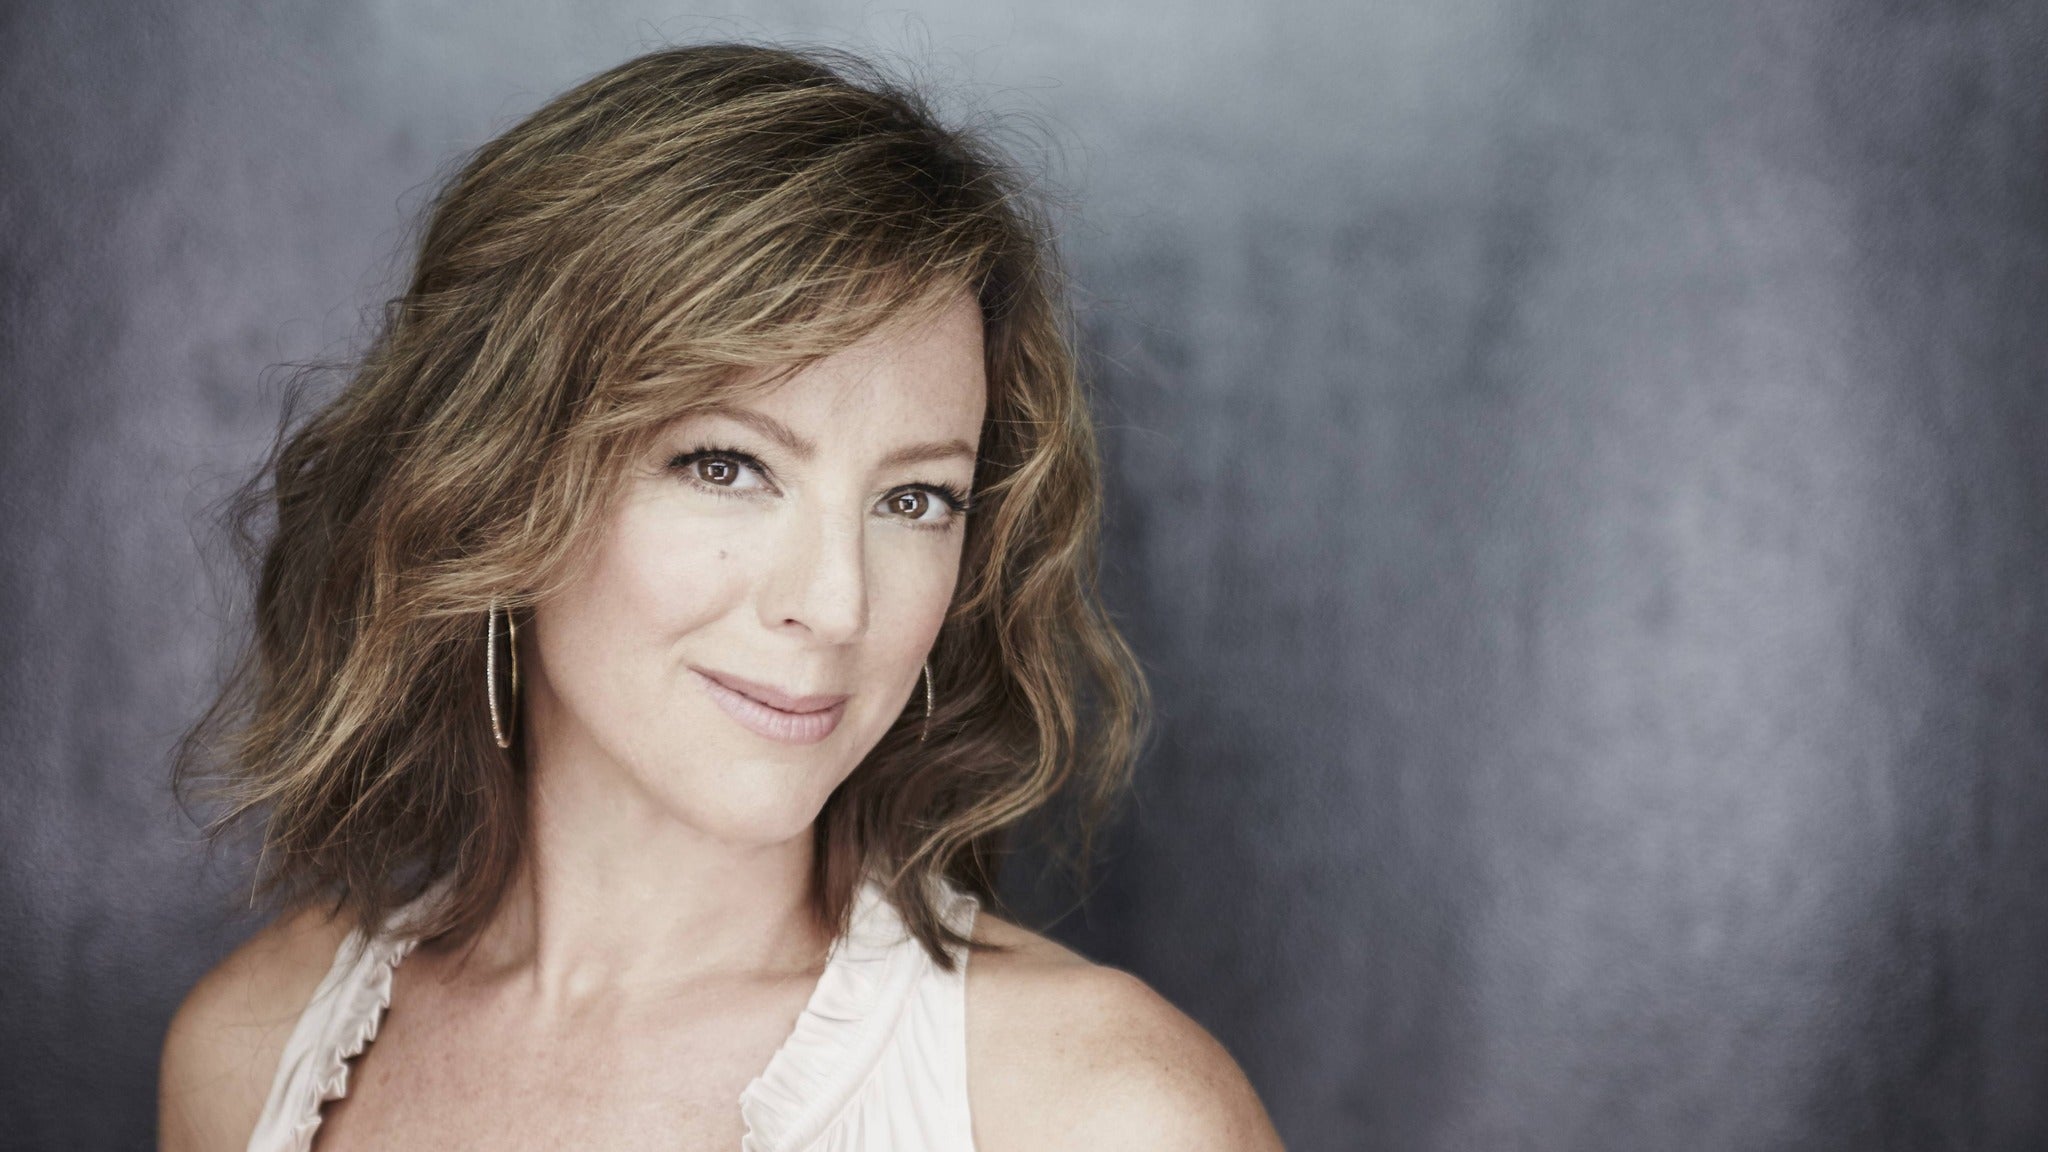 Sarah McLachlan pre-sale code for advance tickets in Calgary